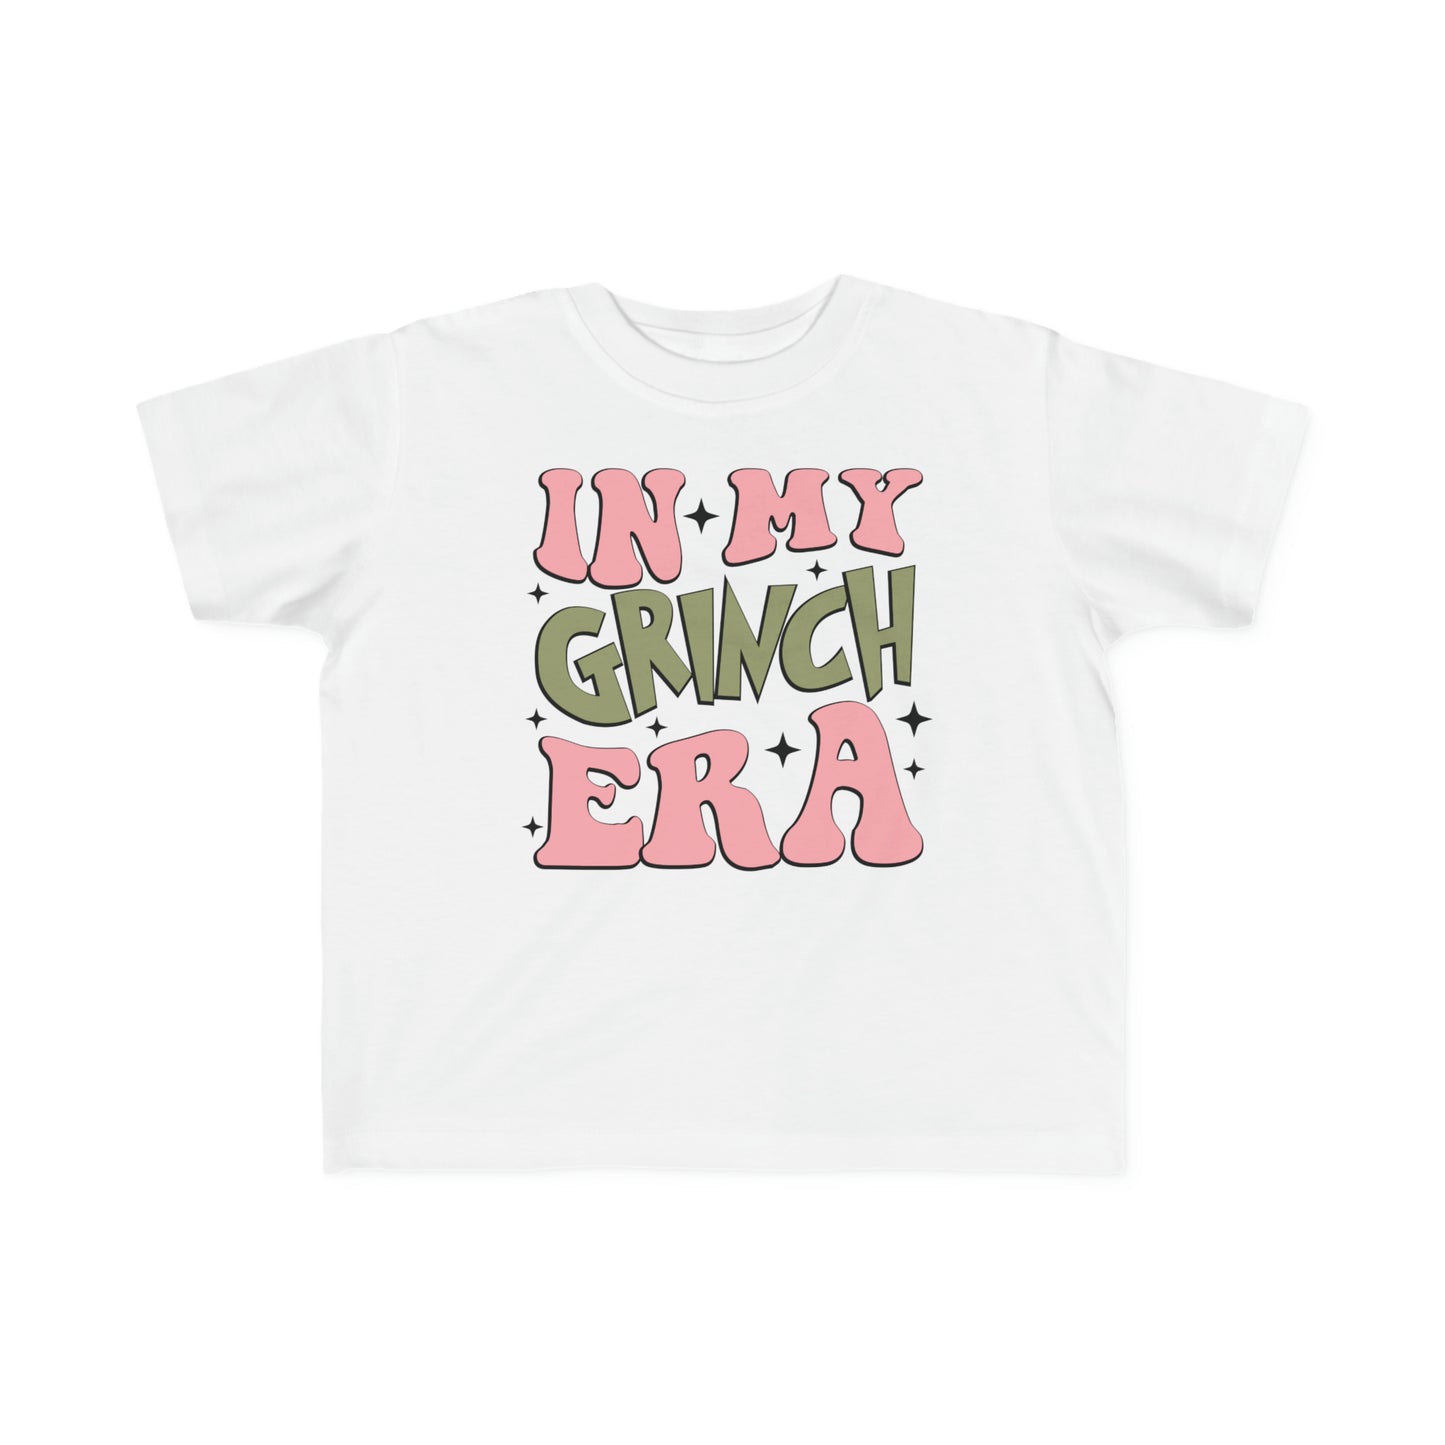 In My Grinch Era Christmas Toddler's Fine Jersey Tee